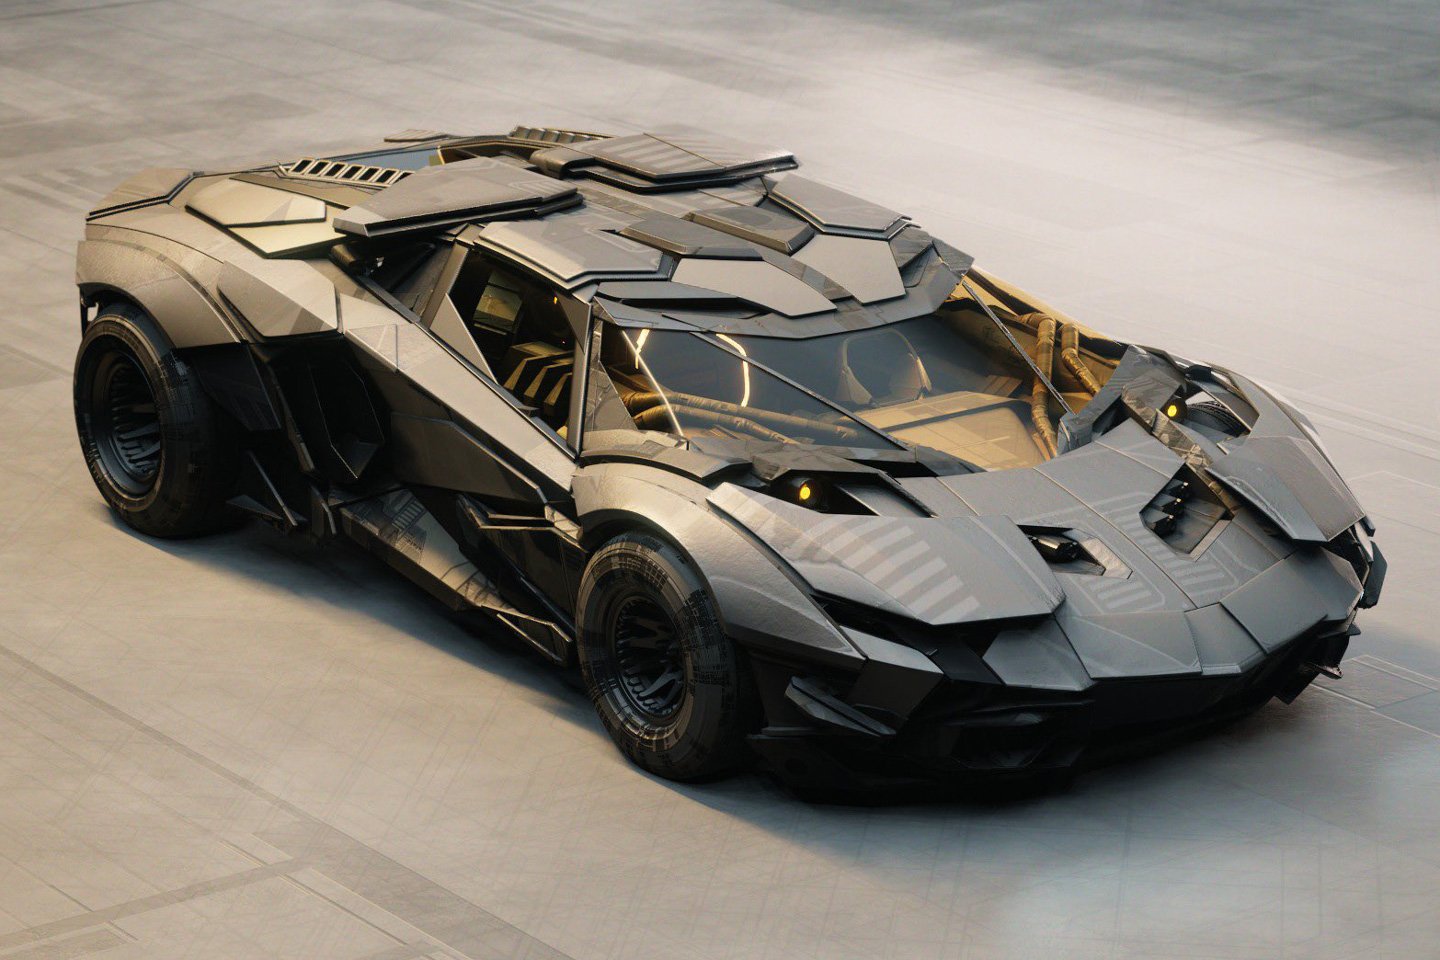 #If Batman drove a Lamborghini, it would almost certainly look like this modded beast